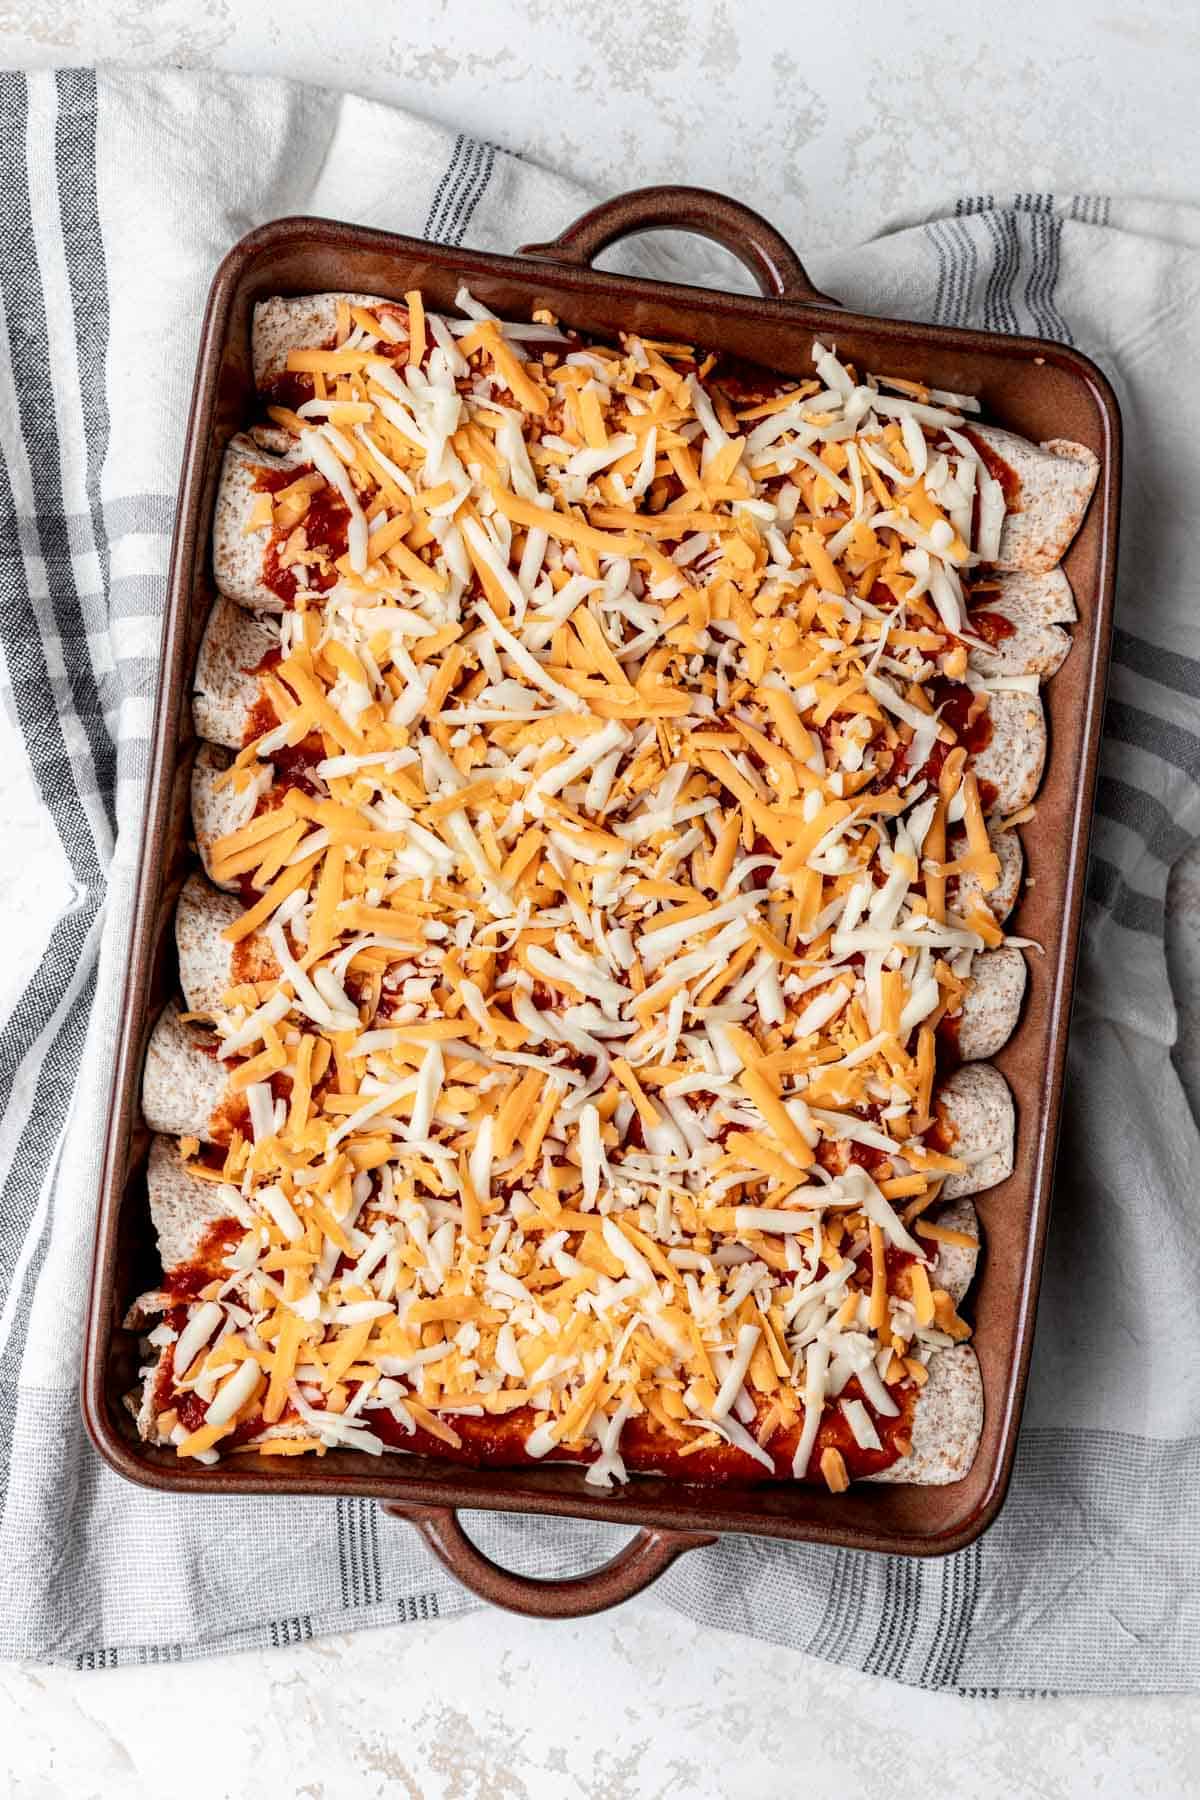 Eight rolled enchiladas topped with enchilada sauce and cheese in a baking dish.